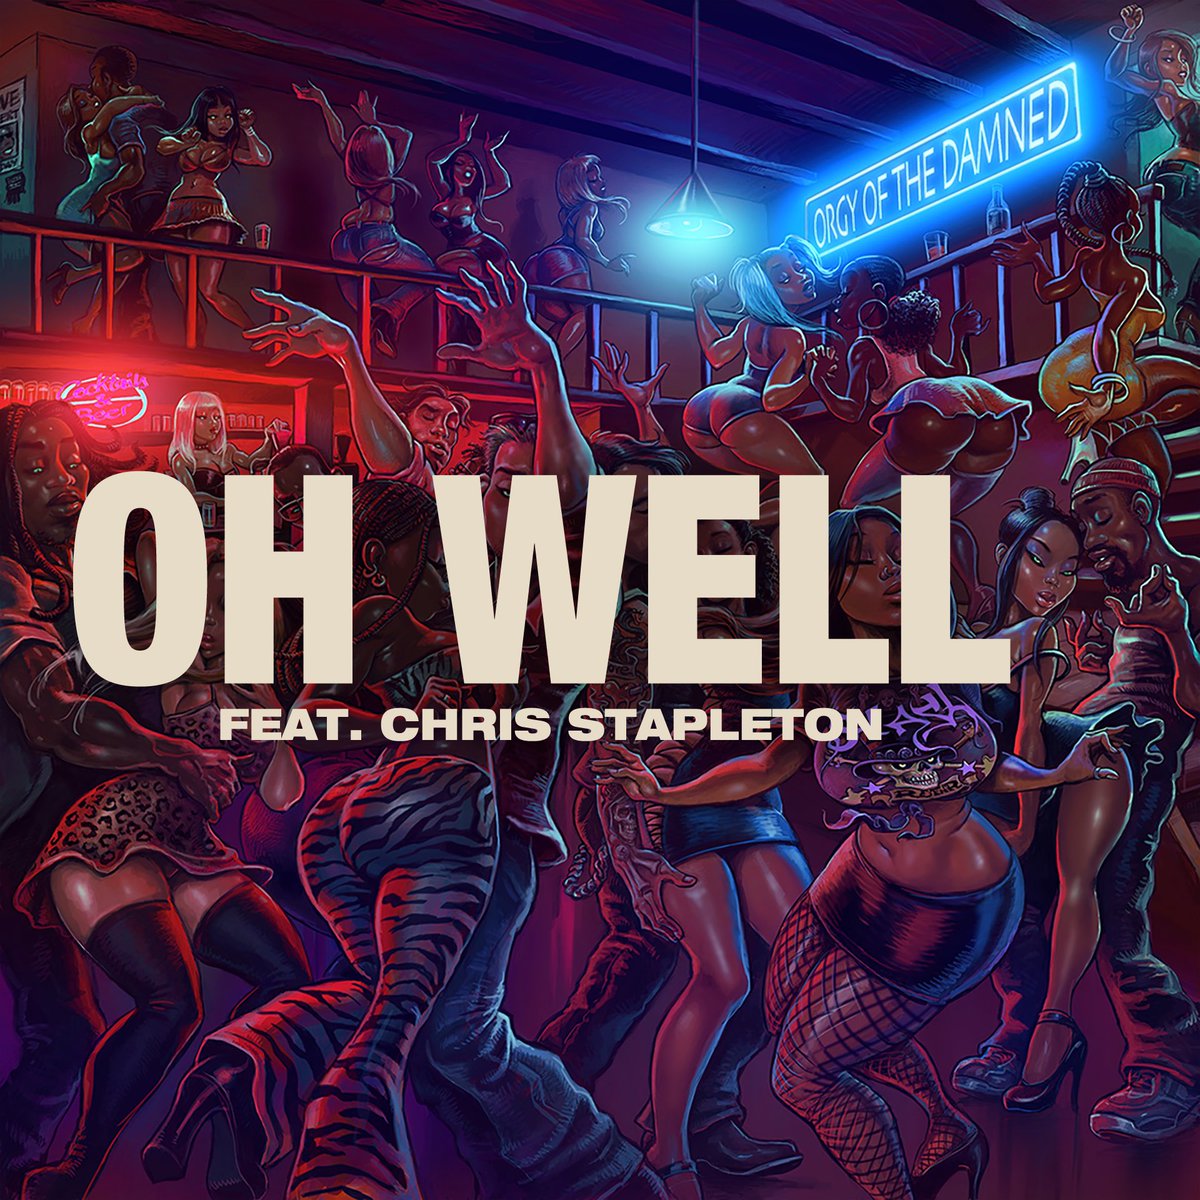 The second single from 'Orgy of the Damned' is called 'Oh Well' and features the country music star @ChrisStapleton, out this Friday everywhere. Pre-save it now at the link in bio. #slashnews